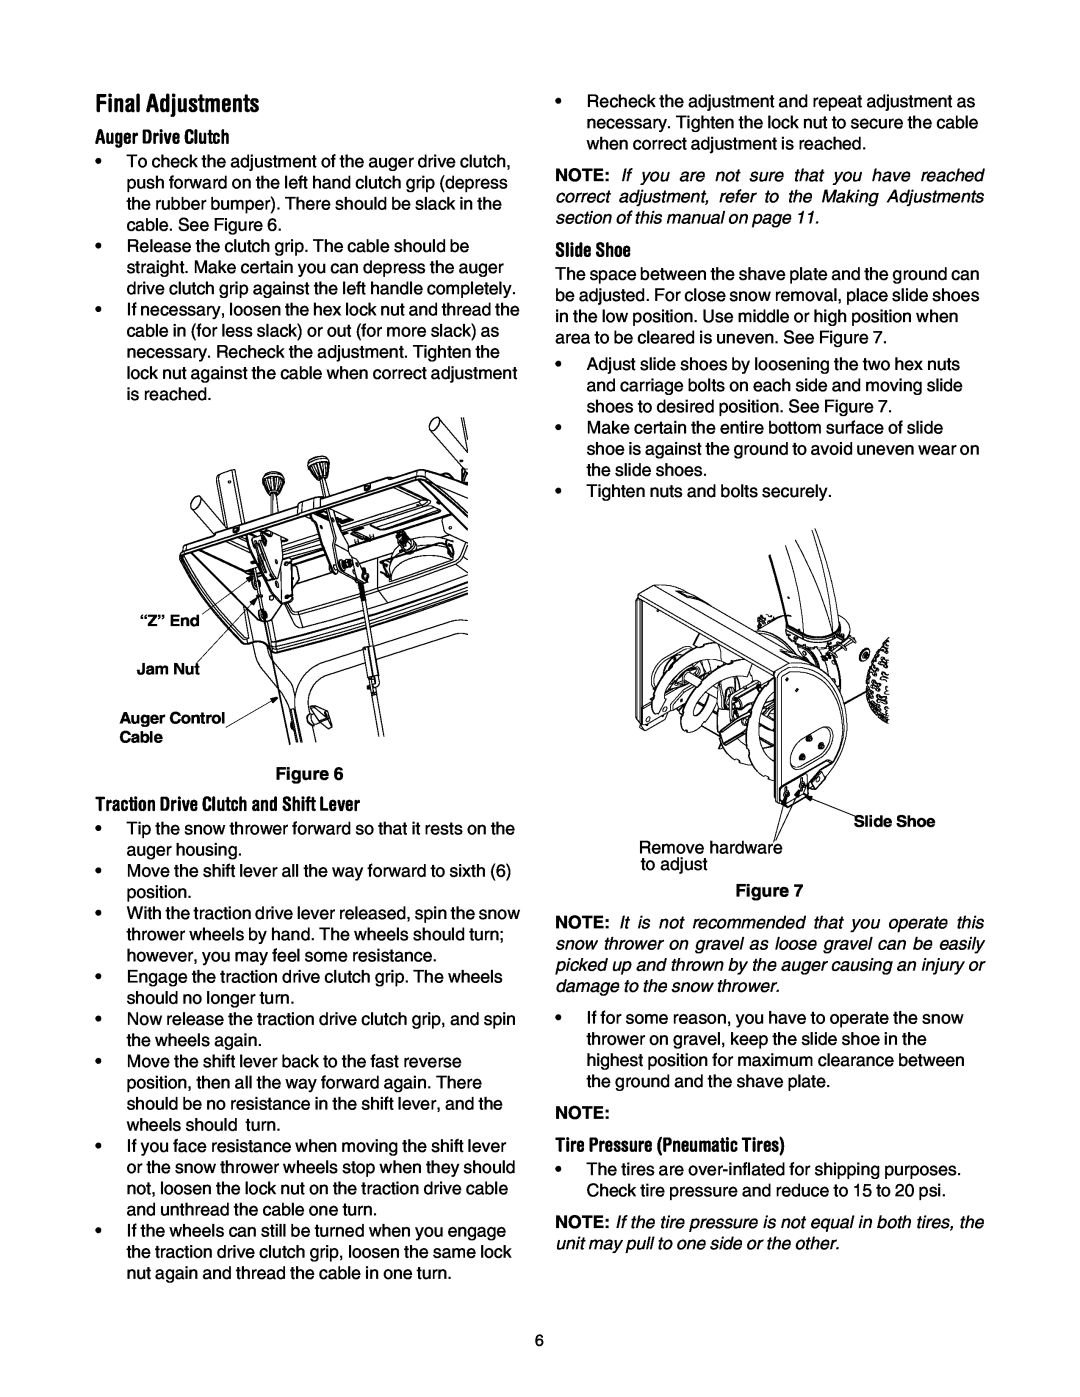 MTD 31AH553G401 manual Final Adjustments, Auger Drive Clutch, Traction Drive Clutch and Shift Lever, Slide Shoe 